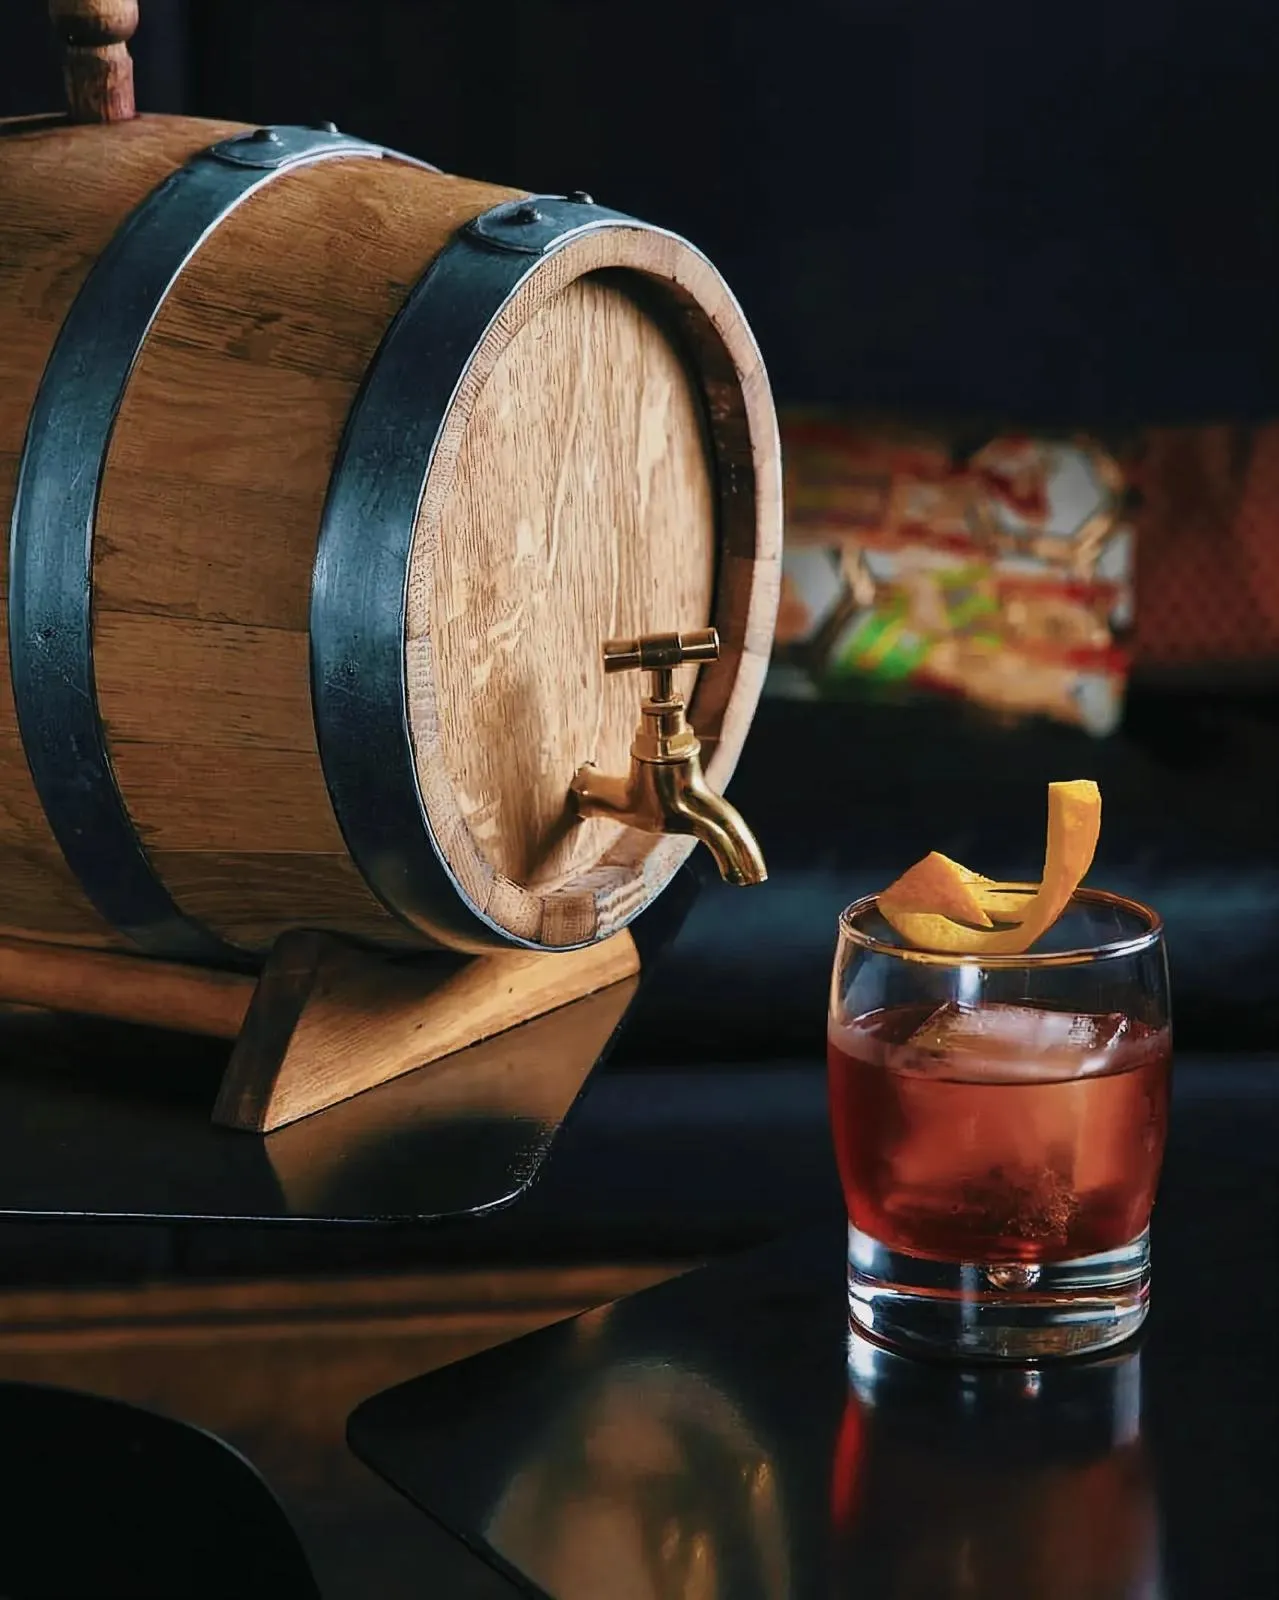 Rustic wooden barrel and glass with whiskey on a table